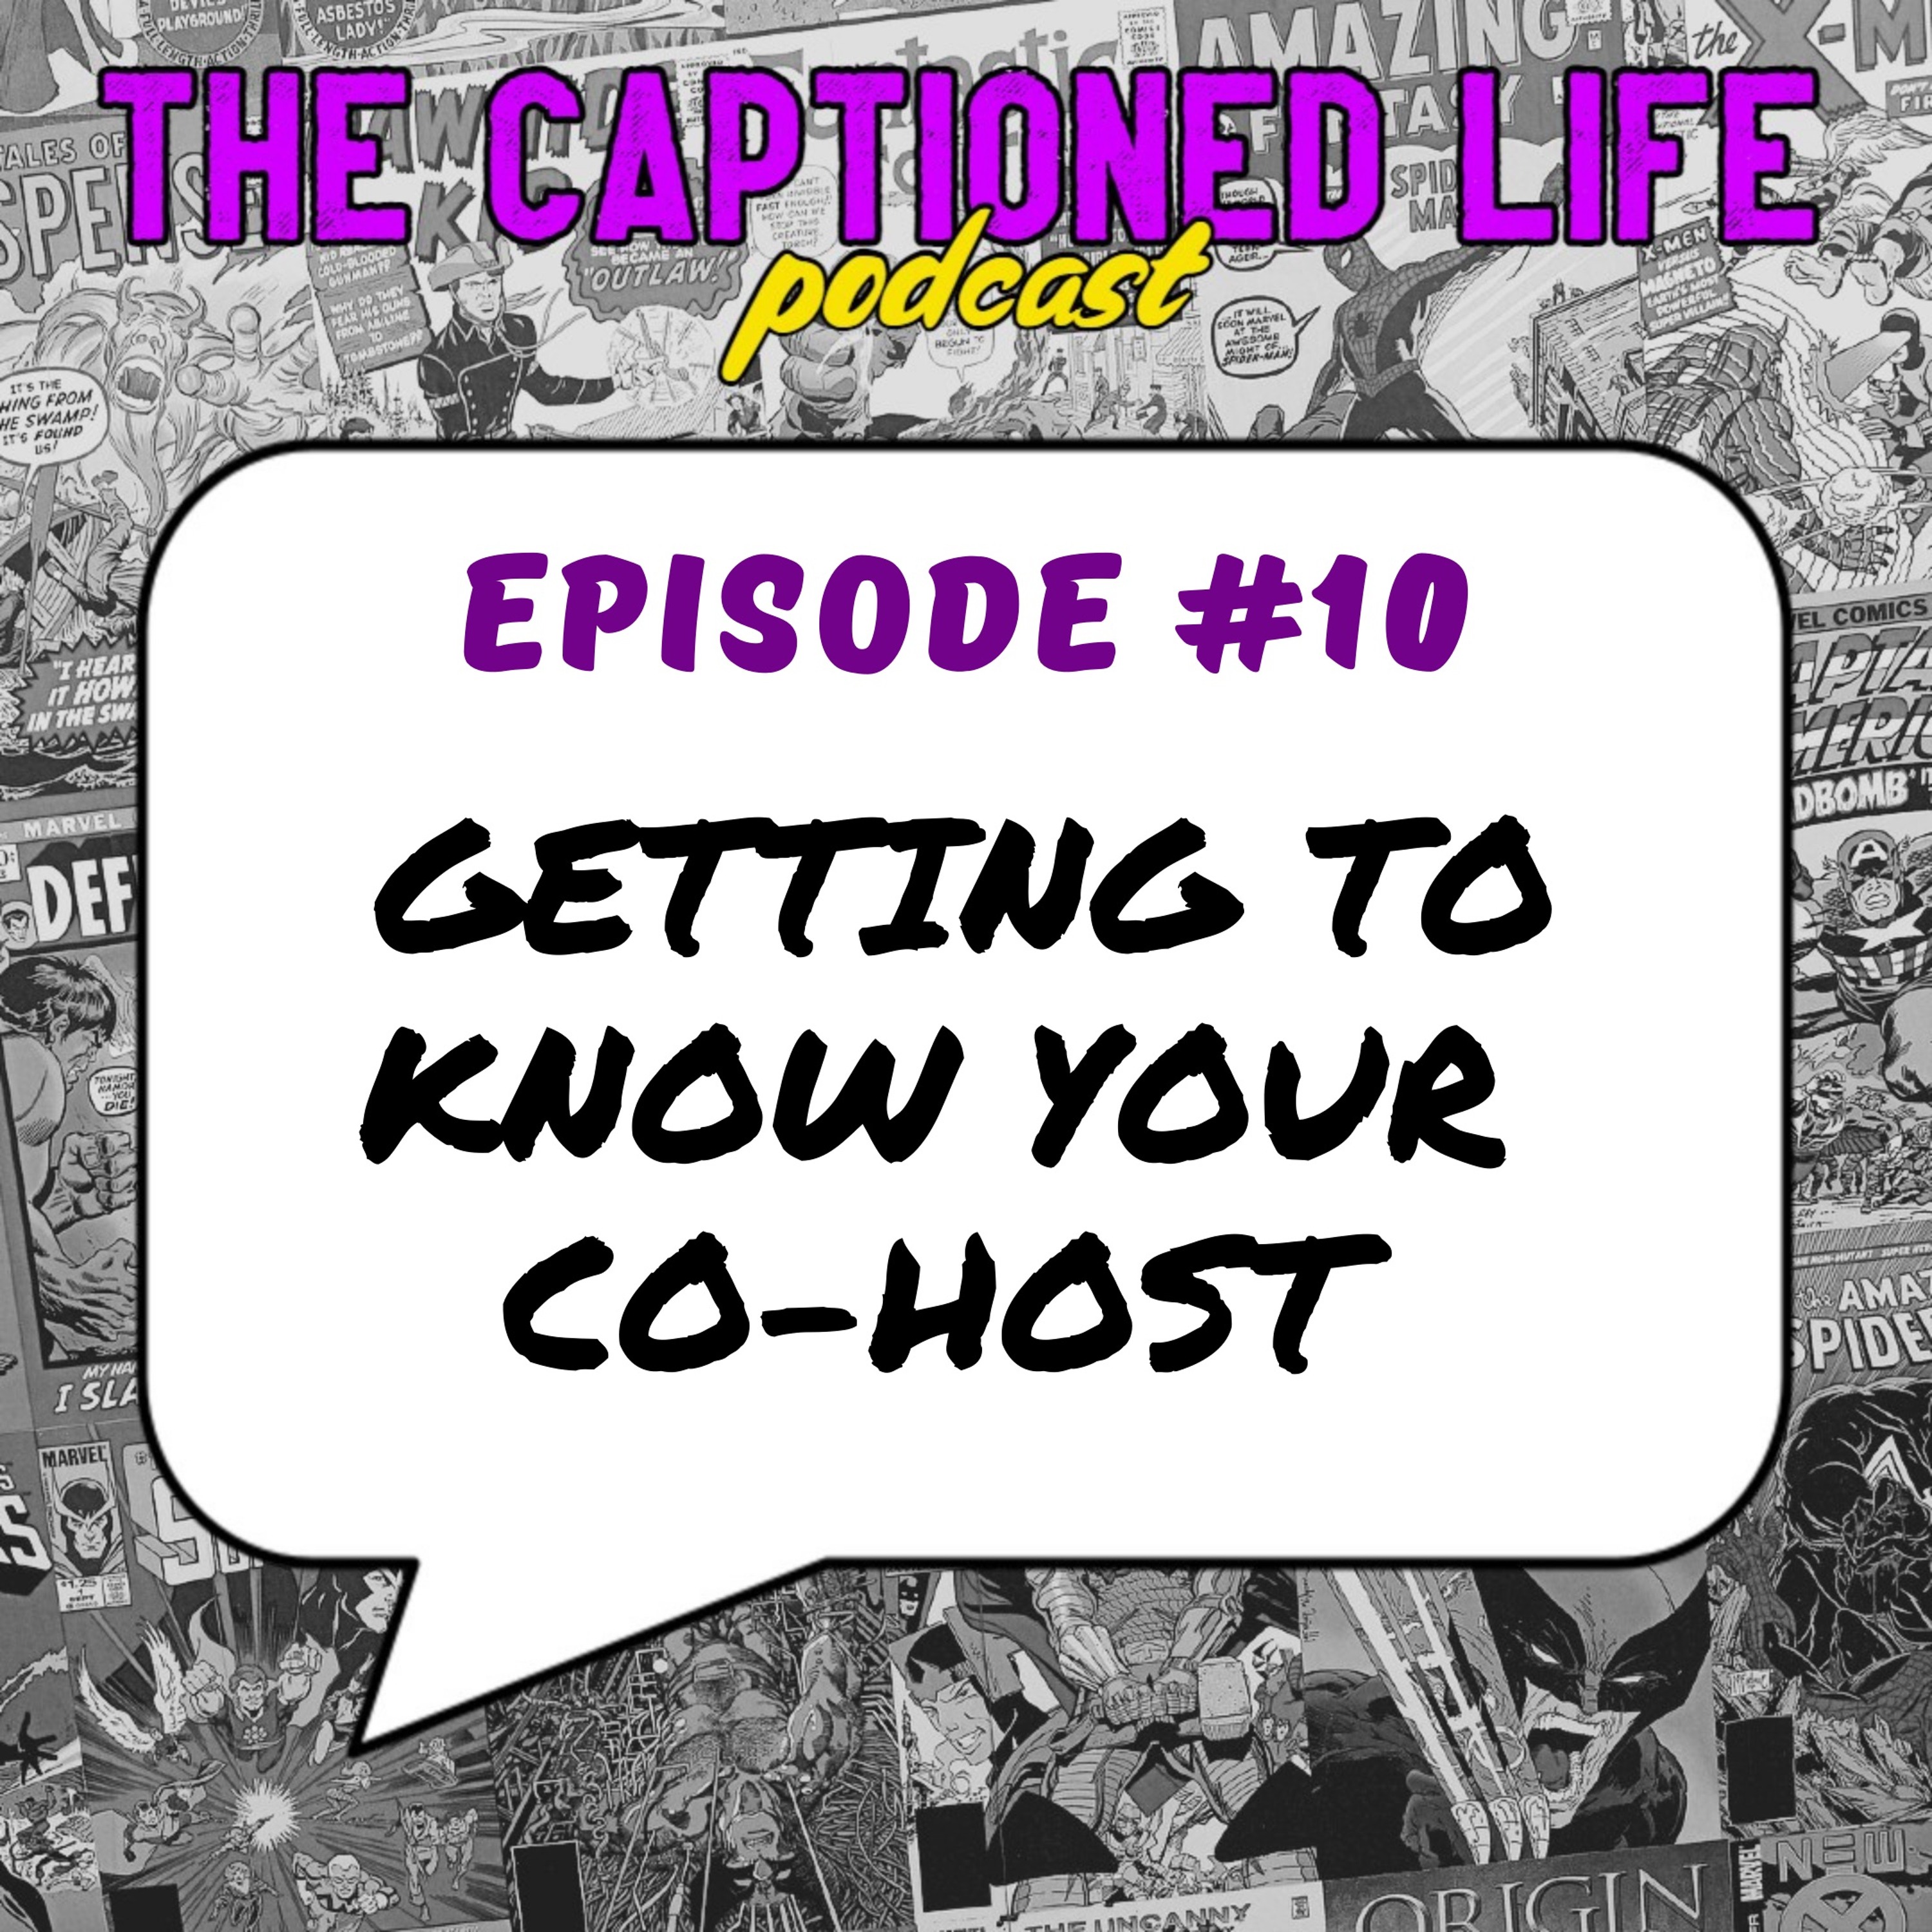 #10 Getting To Know Your Co-Host With James Caudill